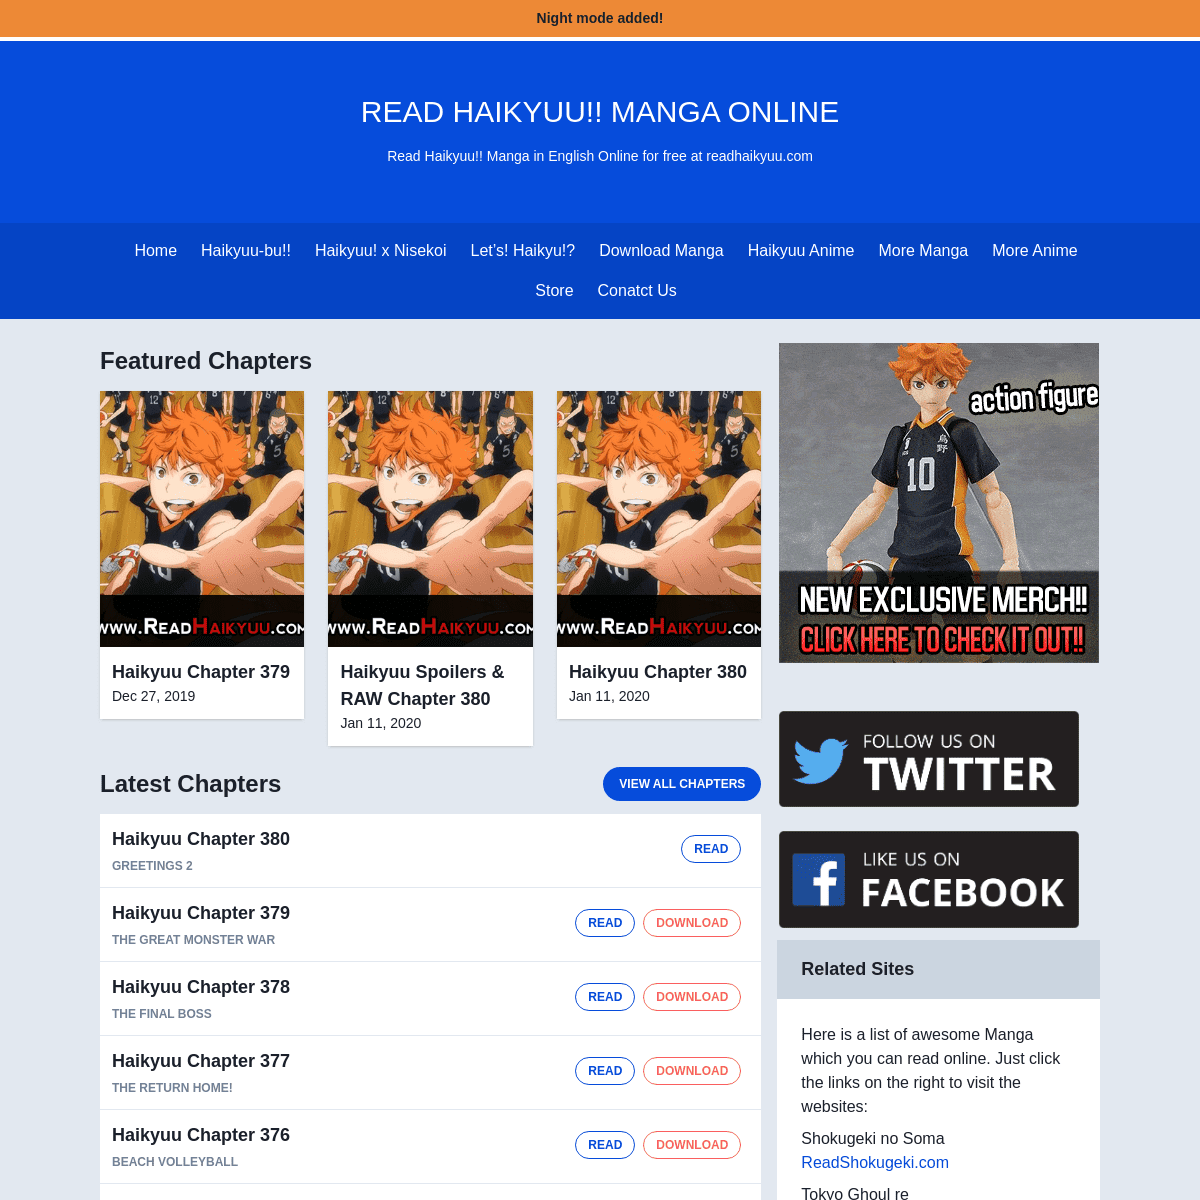 A complete backup of readhaikyuu.com